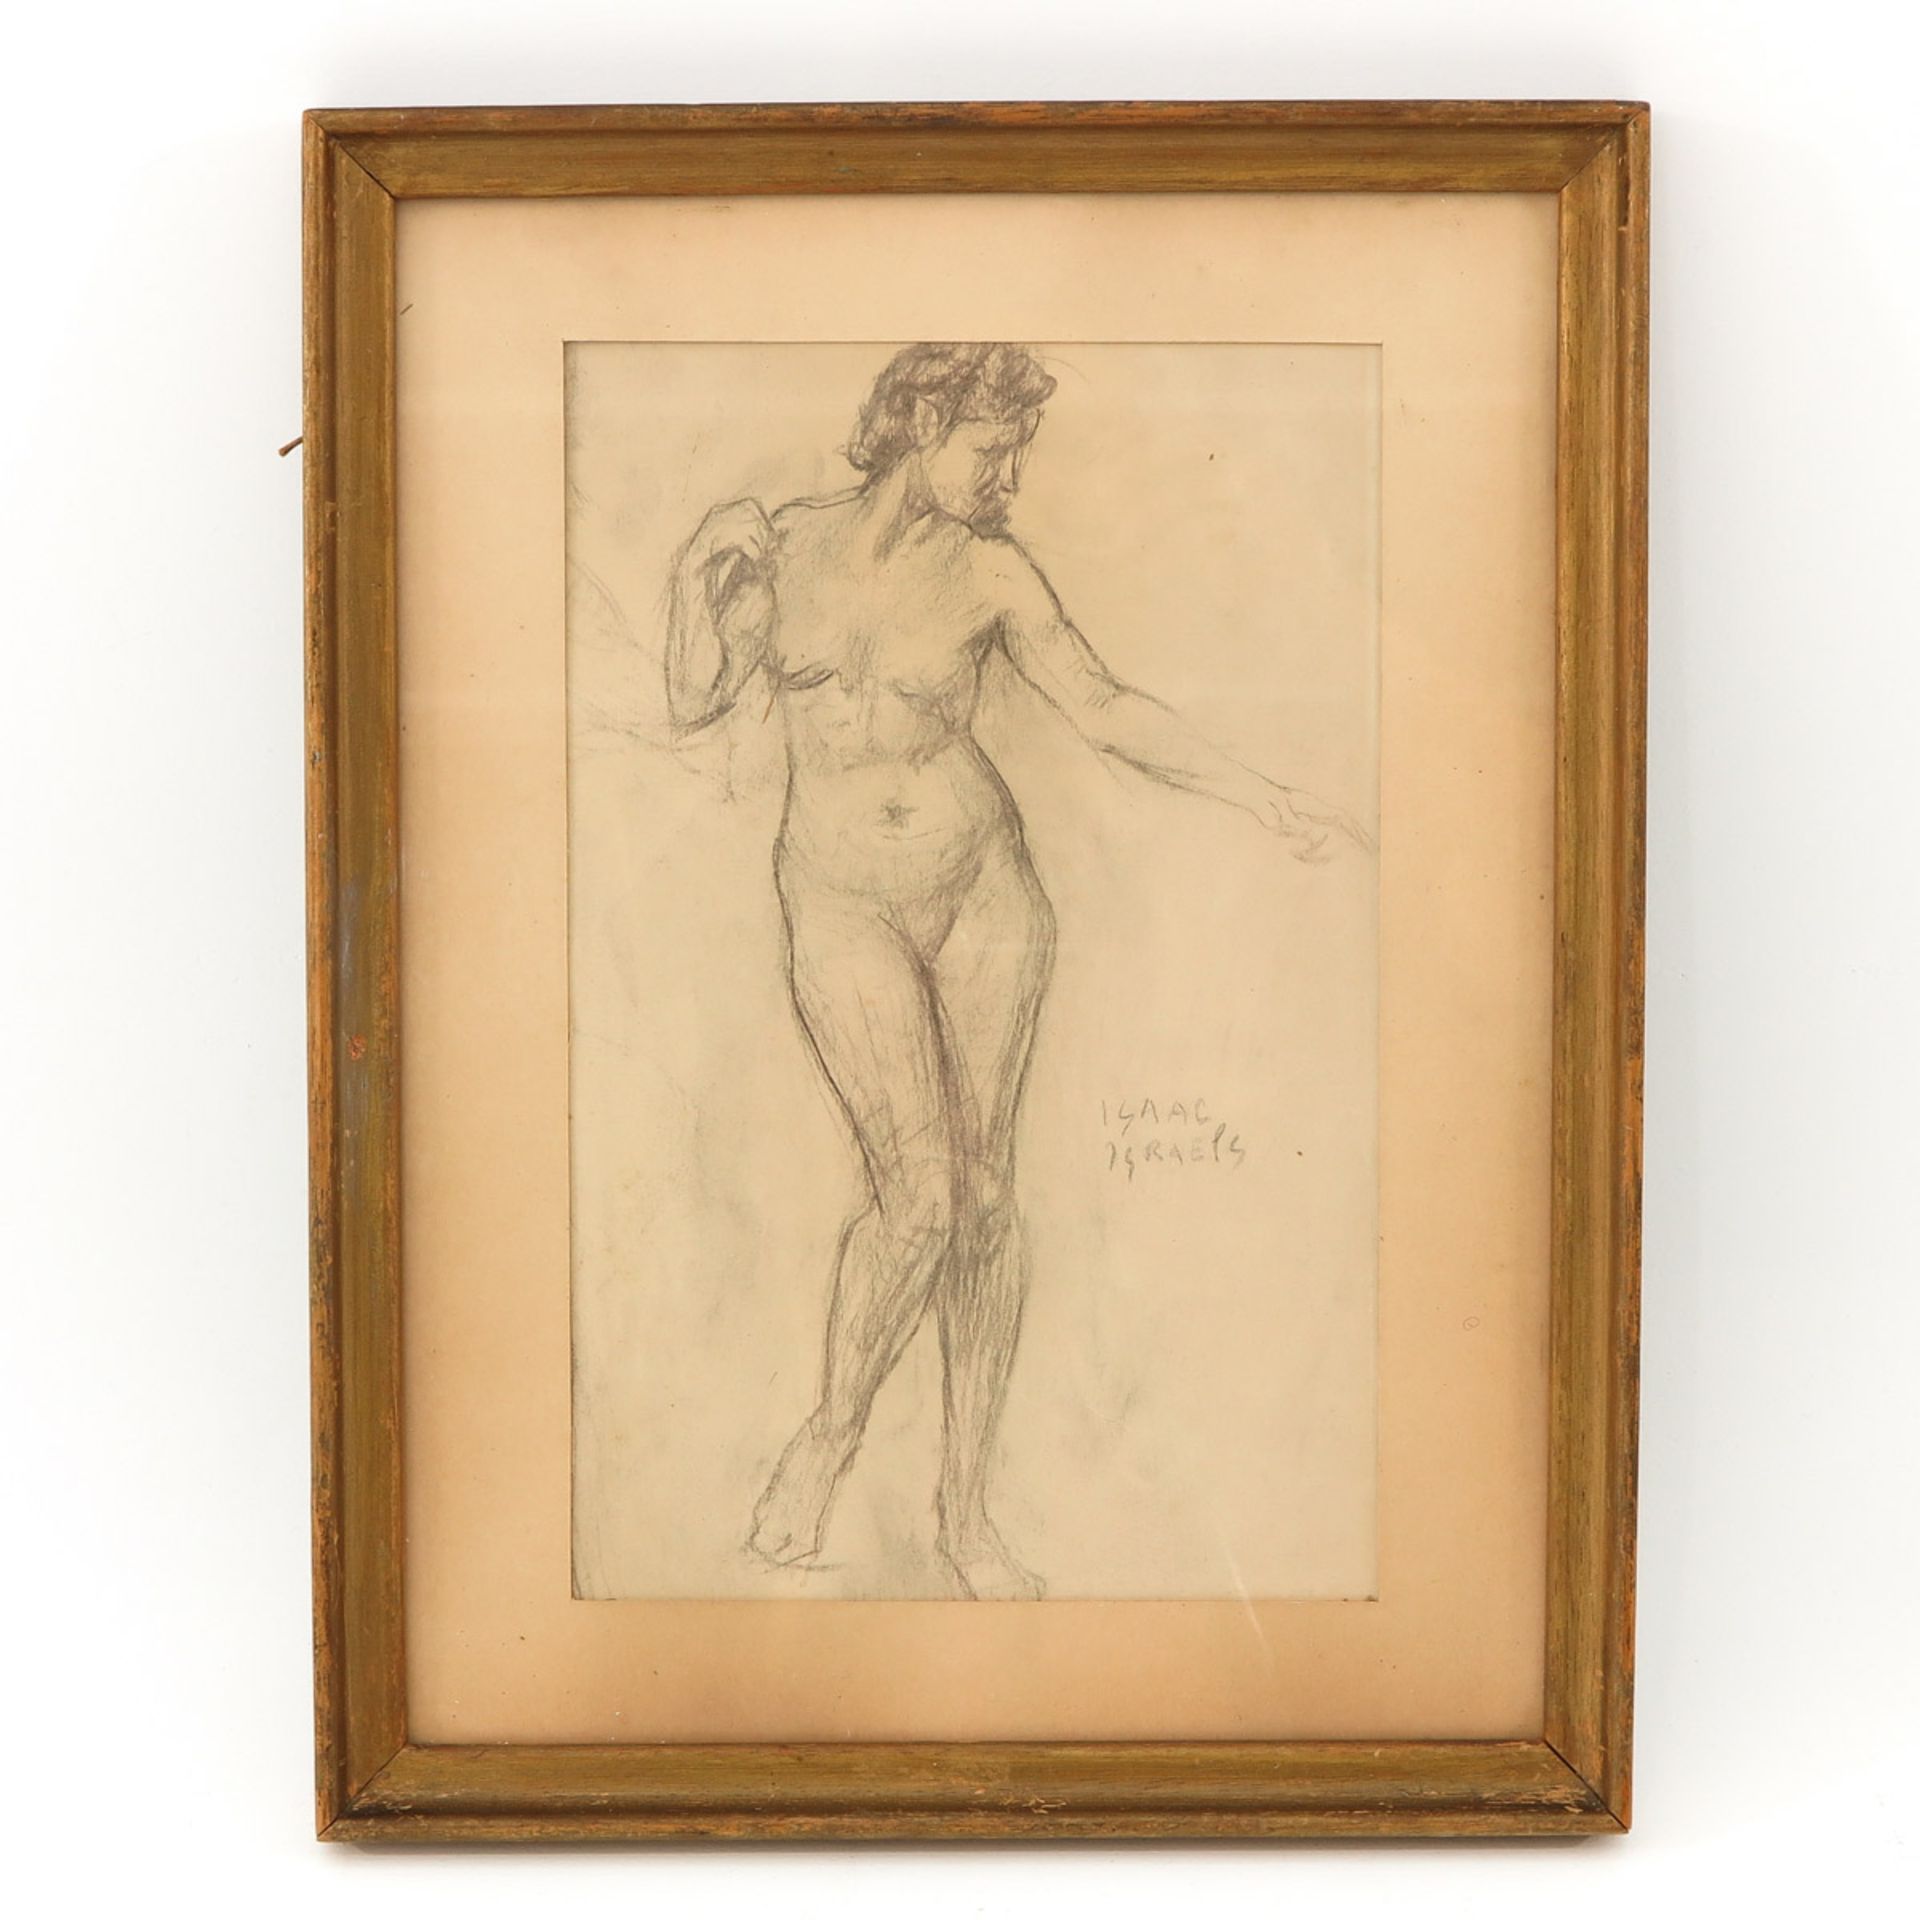 A Study Drawing by Isaac Israels